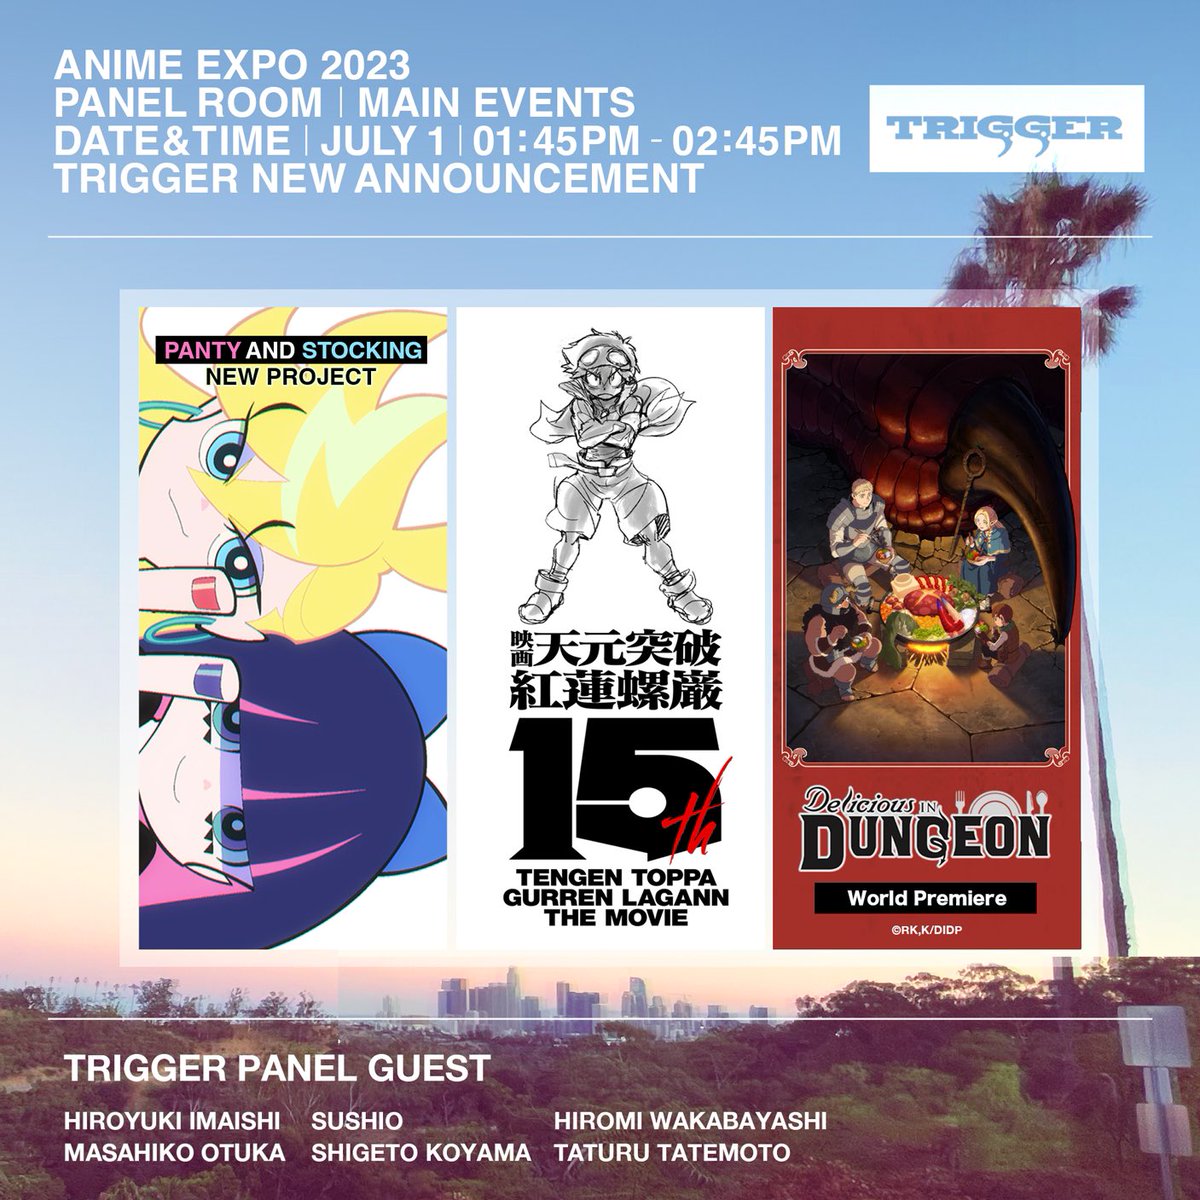 #AX2023
We’re double dipping, no ‘triple dipping’ for this year’s panel! We're bringing many of TRIGGER’s star members to celebrate the world premiere of Delicious in Dungeon, the 15th anniversary of GURREN LAGANN the movie, and to further blueball our fans with PSG updates!!